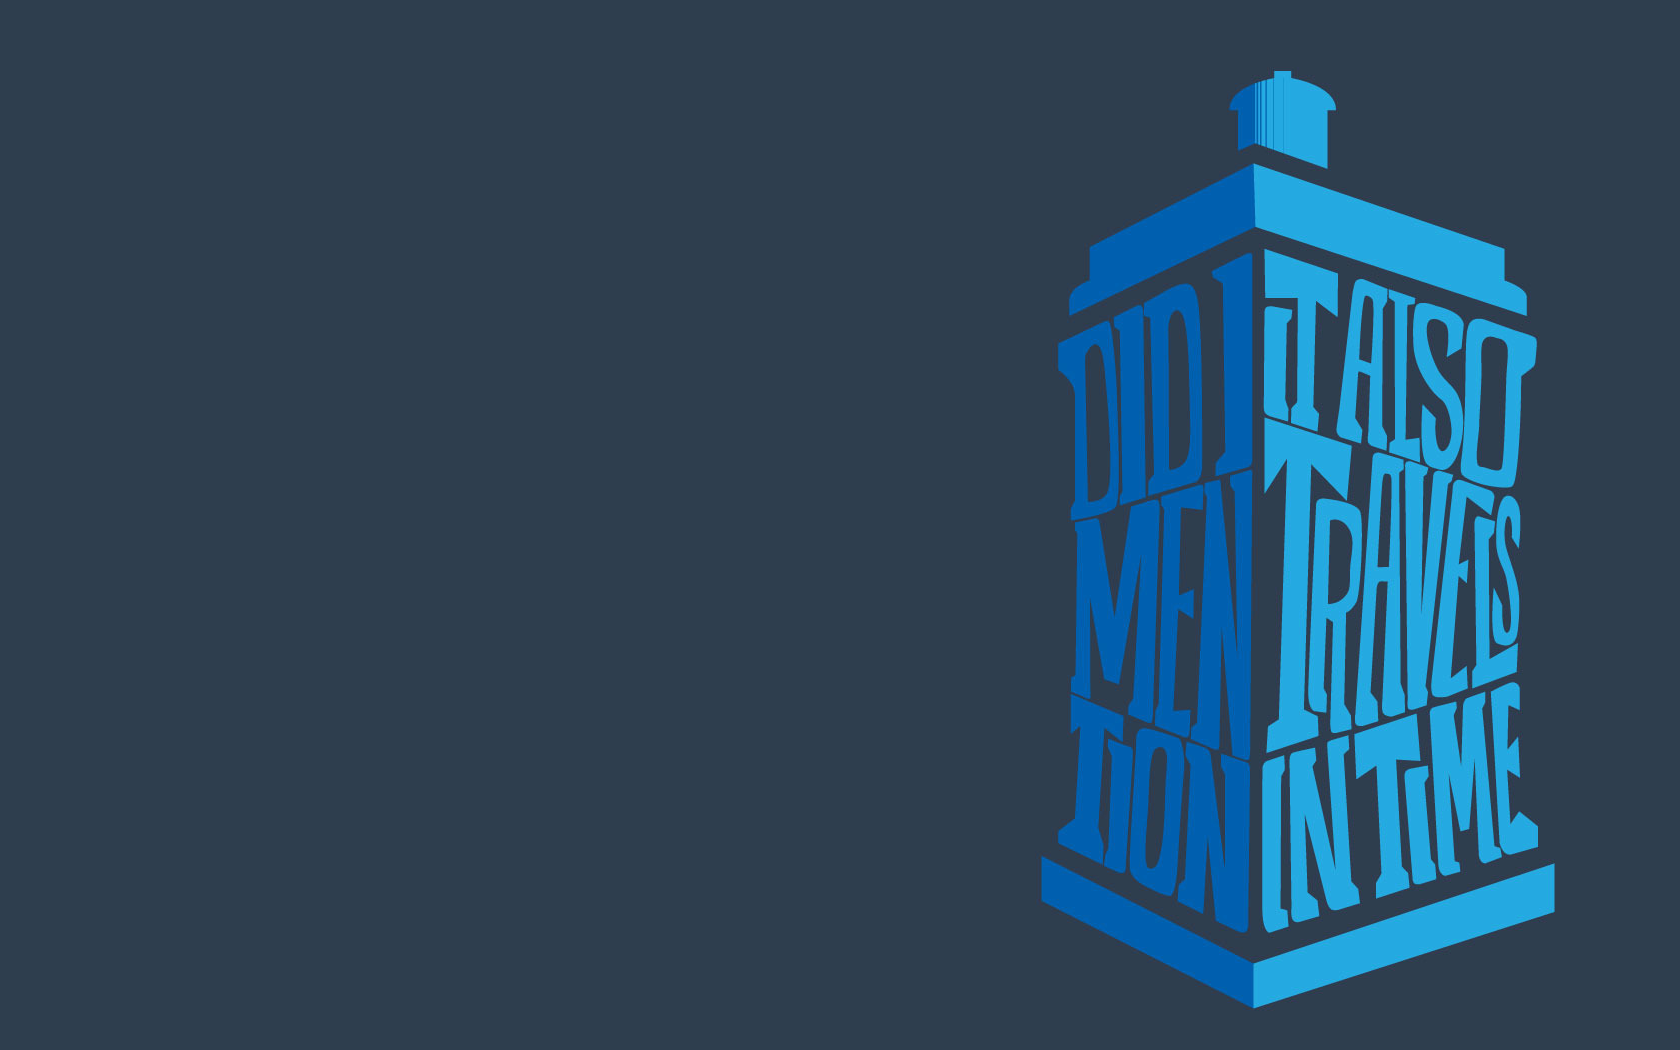 Doctor Who Wallpaper